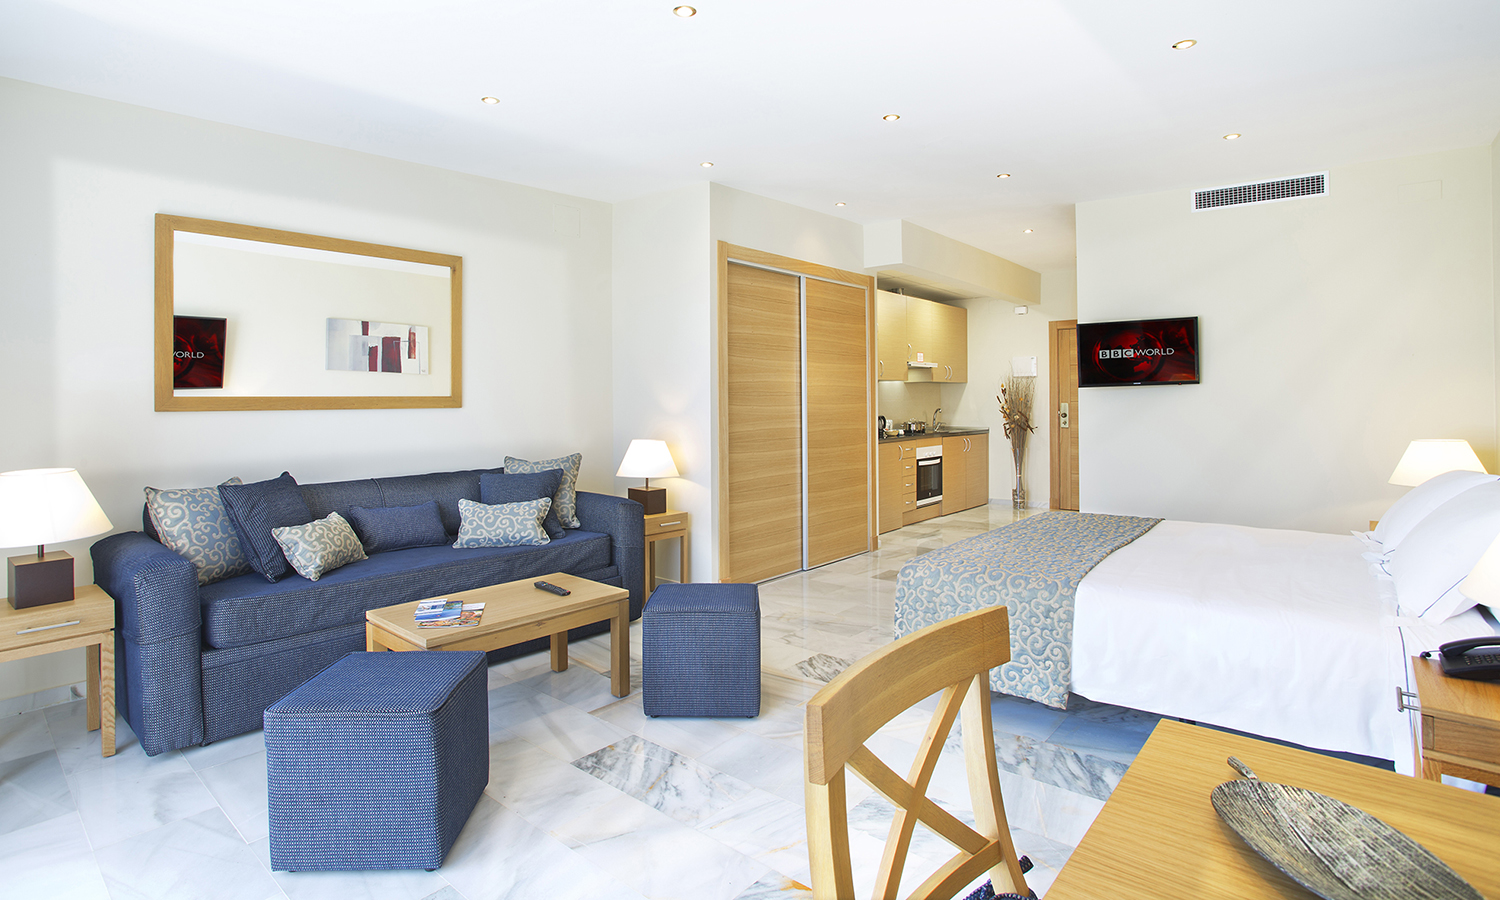 Garden Suites are located on the ground floor of the hotel and have swimming pool views